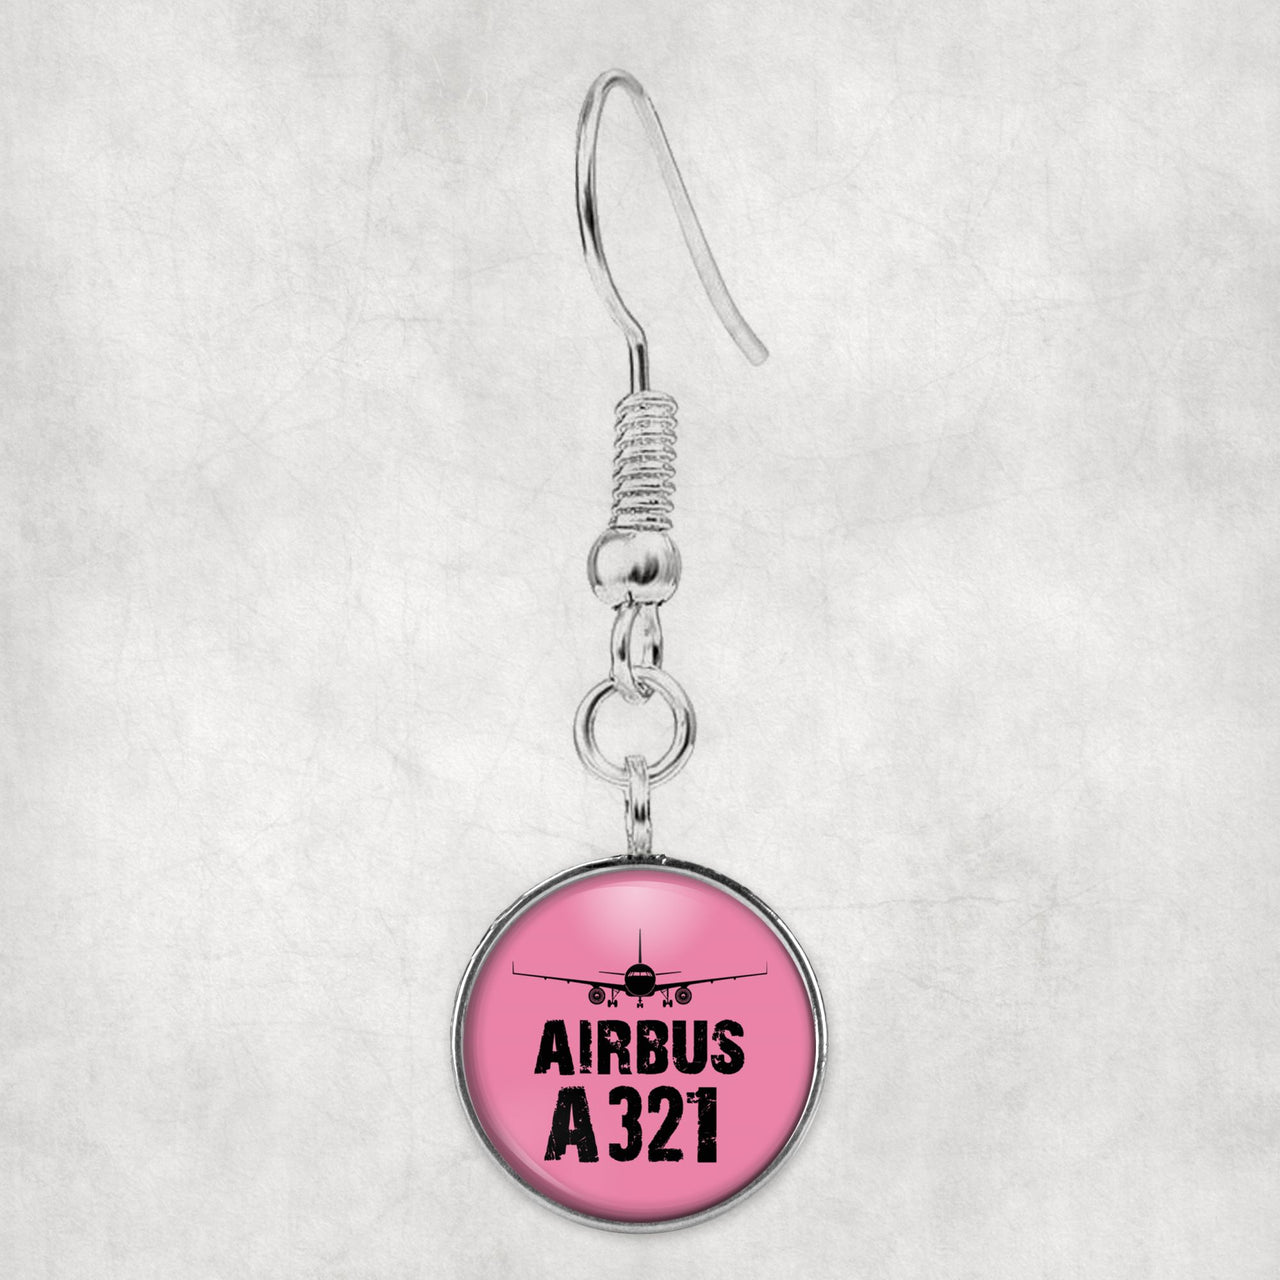 Airbus A321 & Plane Designed Earrings